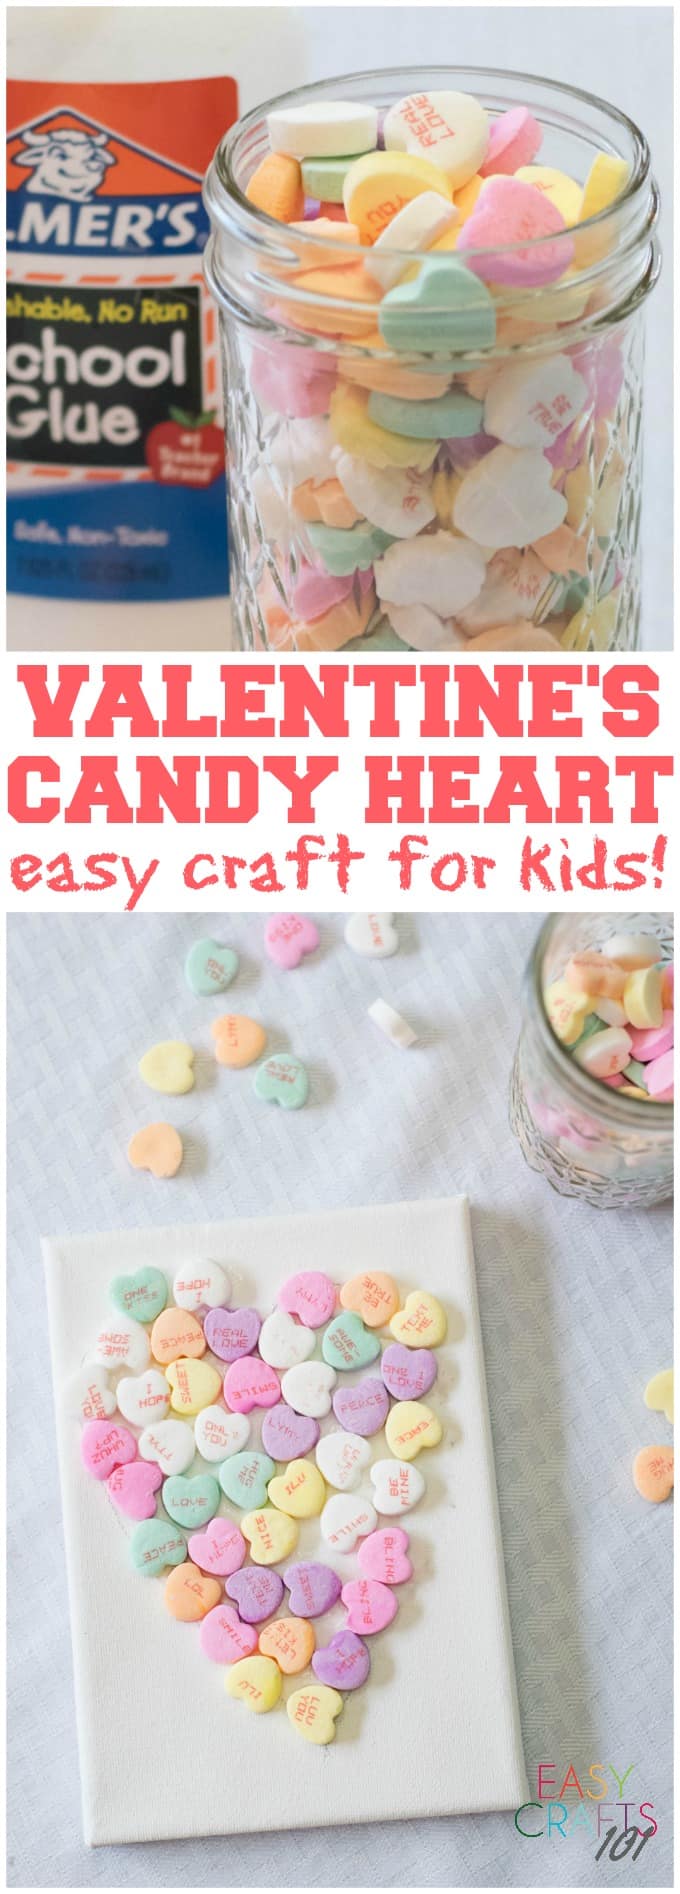 Valentine's Candy Heart Easy Craft for Kids